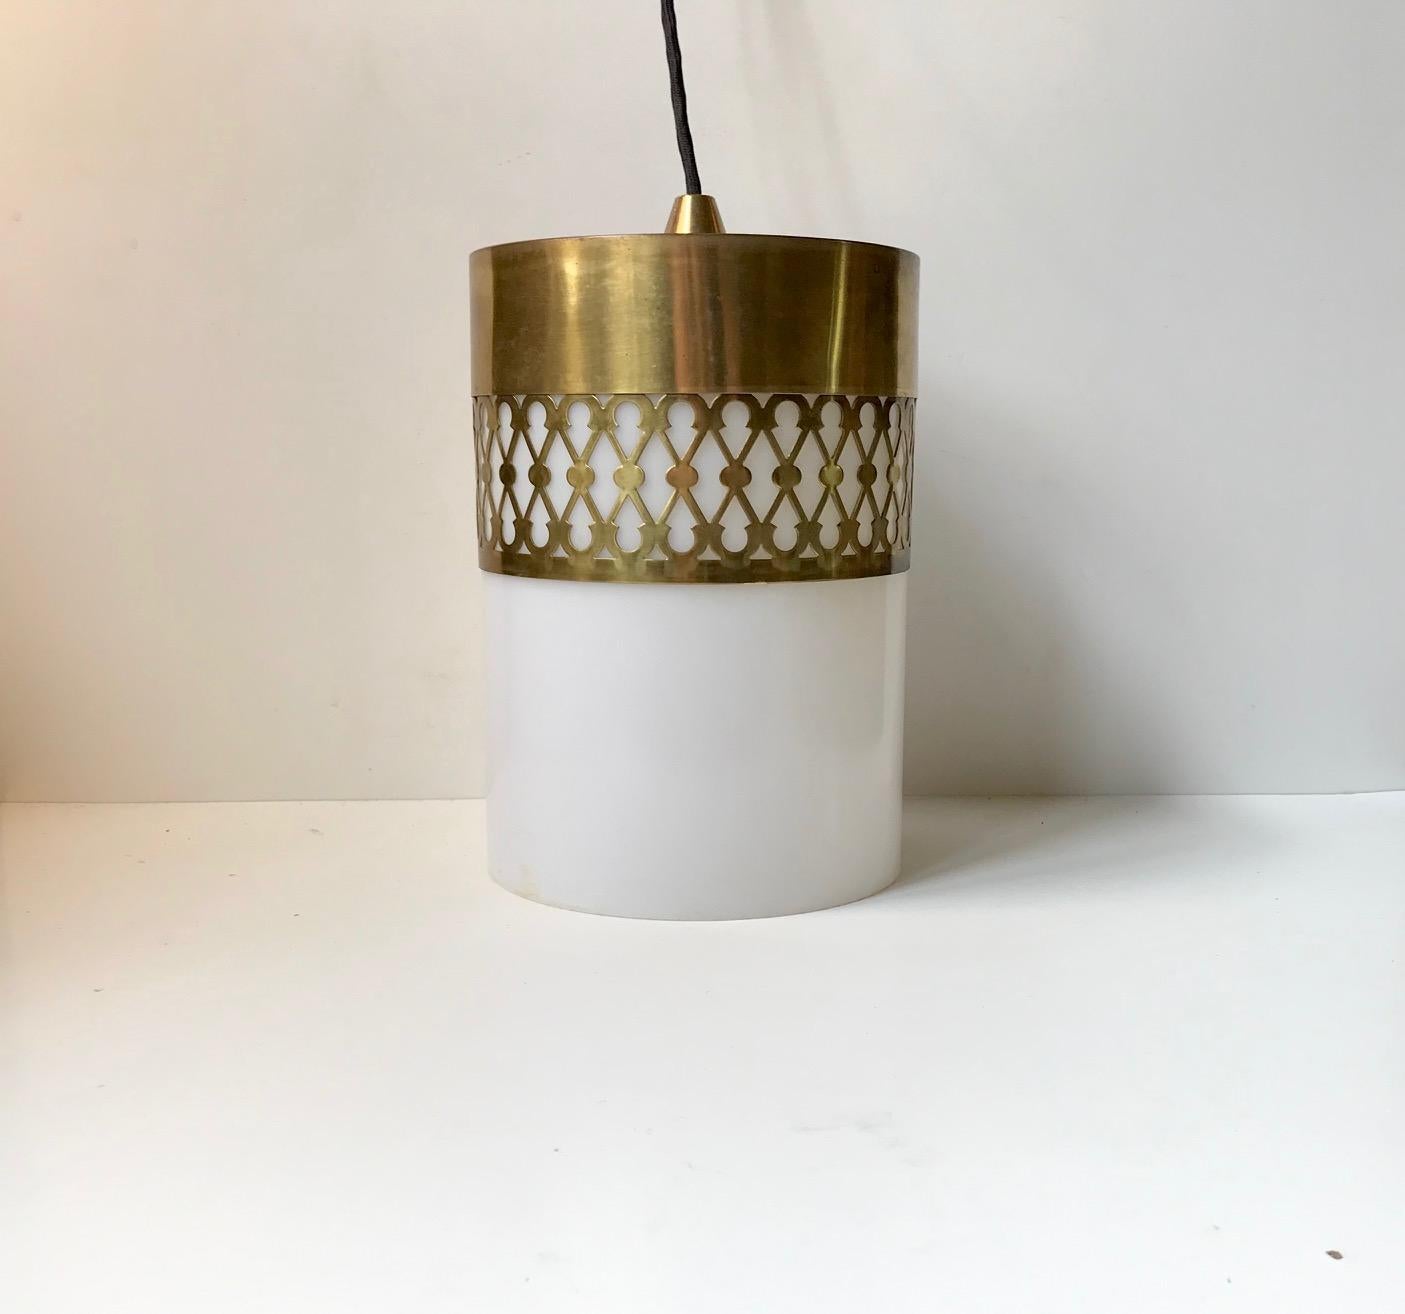 Danish ceiling light designed by Bent Karlby for Lyfa, Denmark and manufactured in the mid-1960s. The light consists of white fluorescent Lucite shade set in a top of perforated brass that has patinated charmingly over the years. This light is